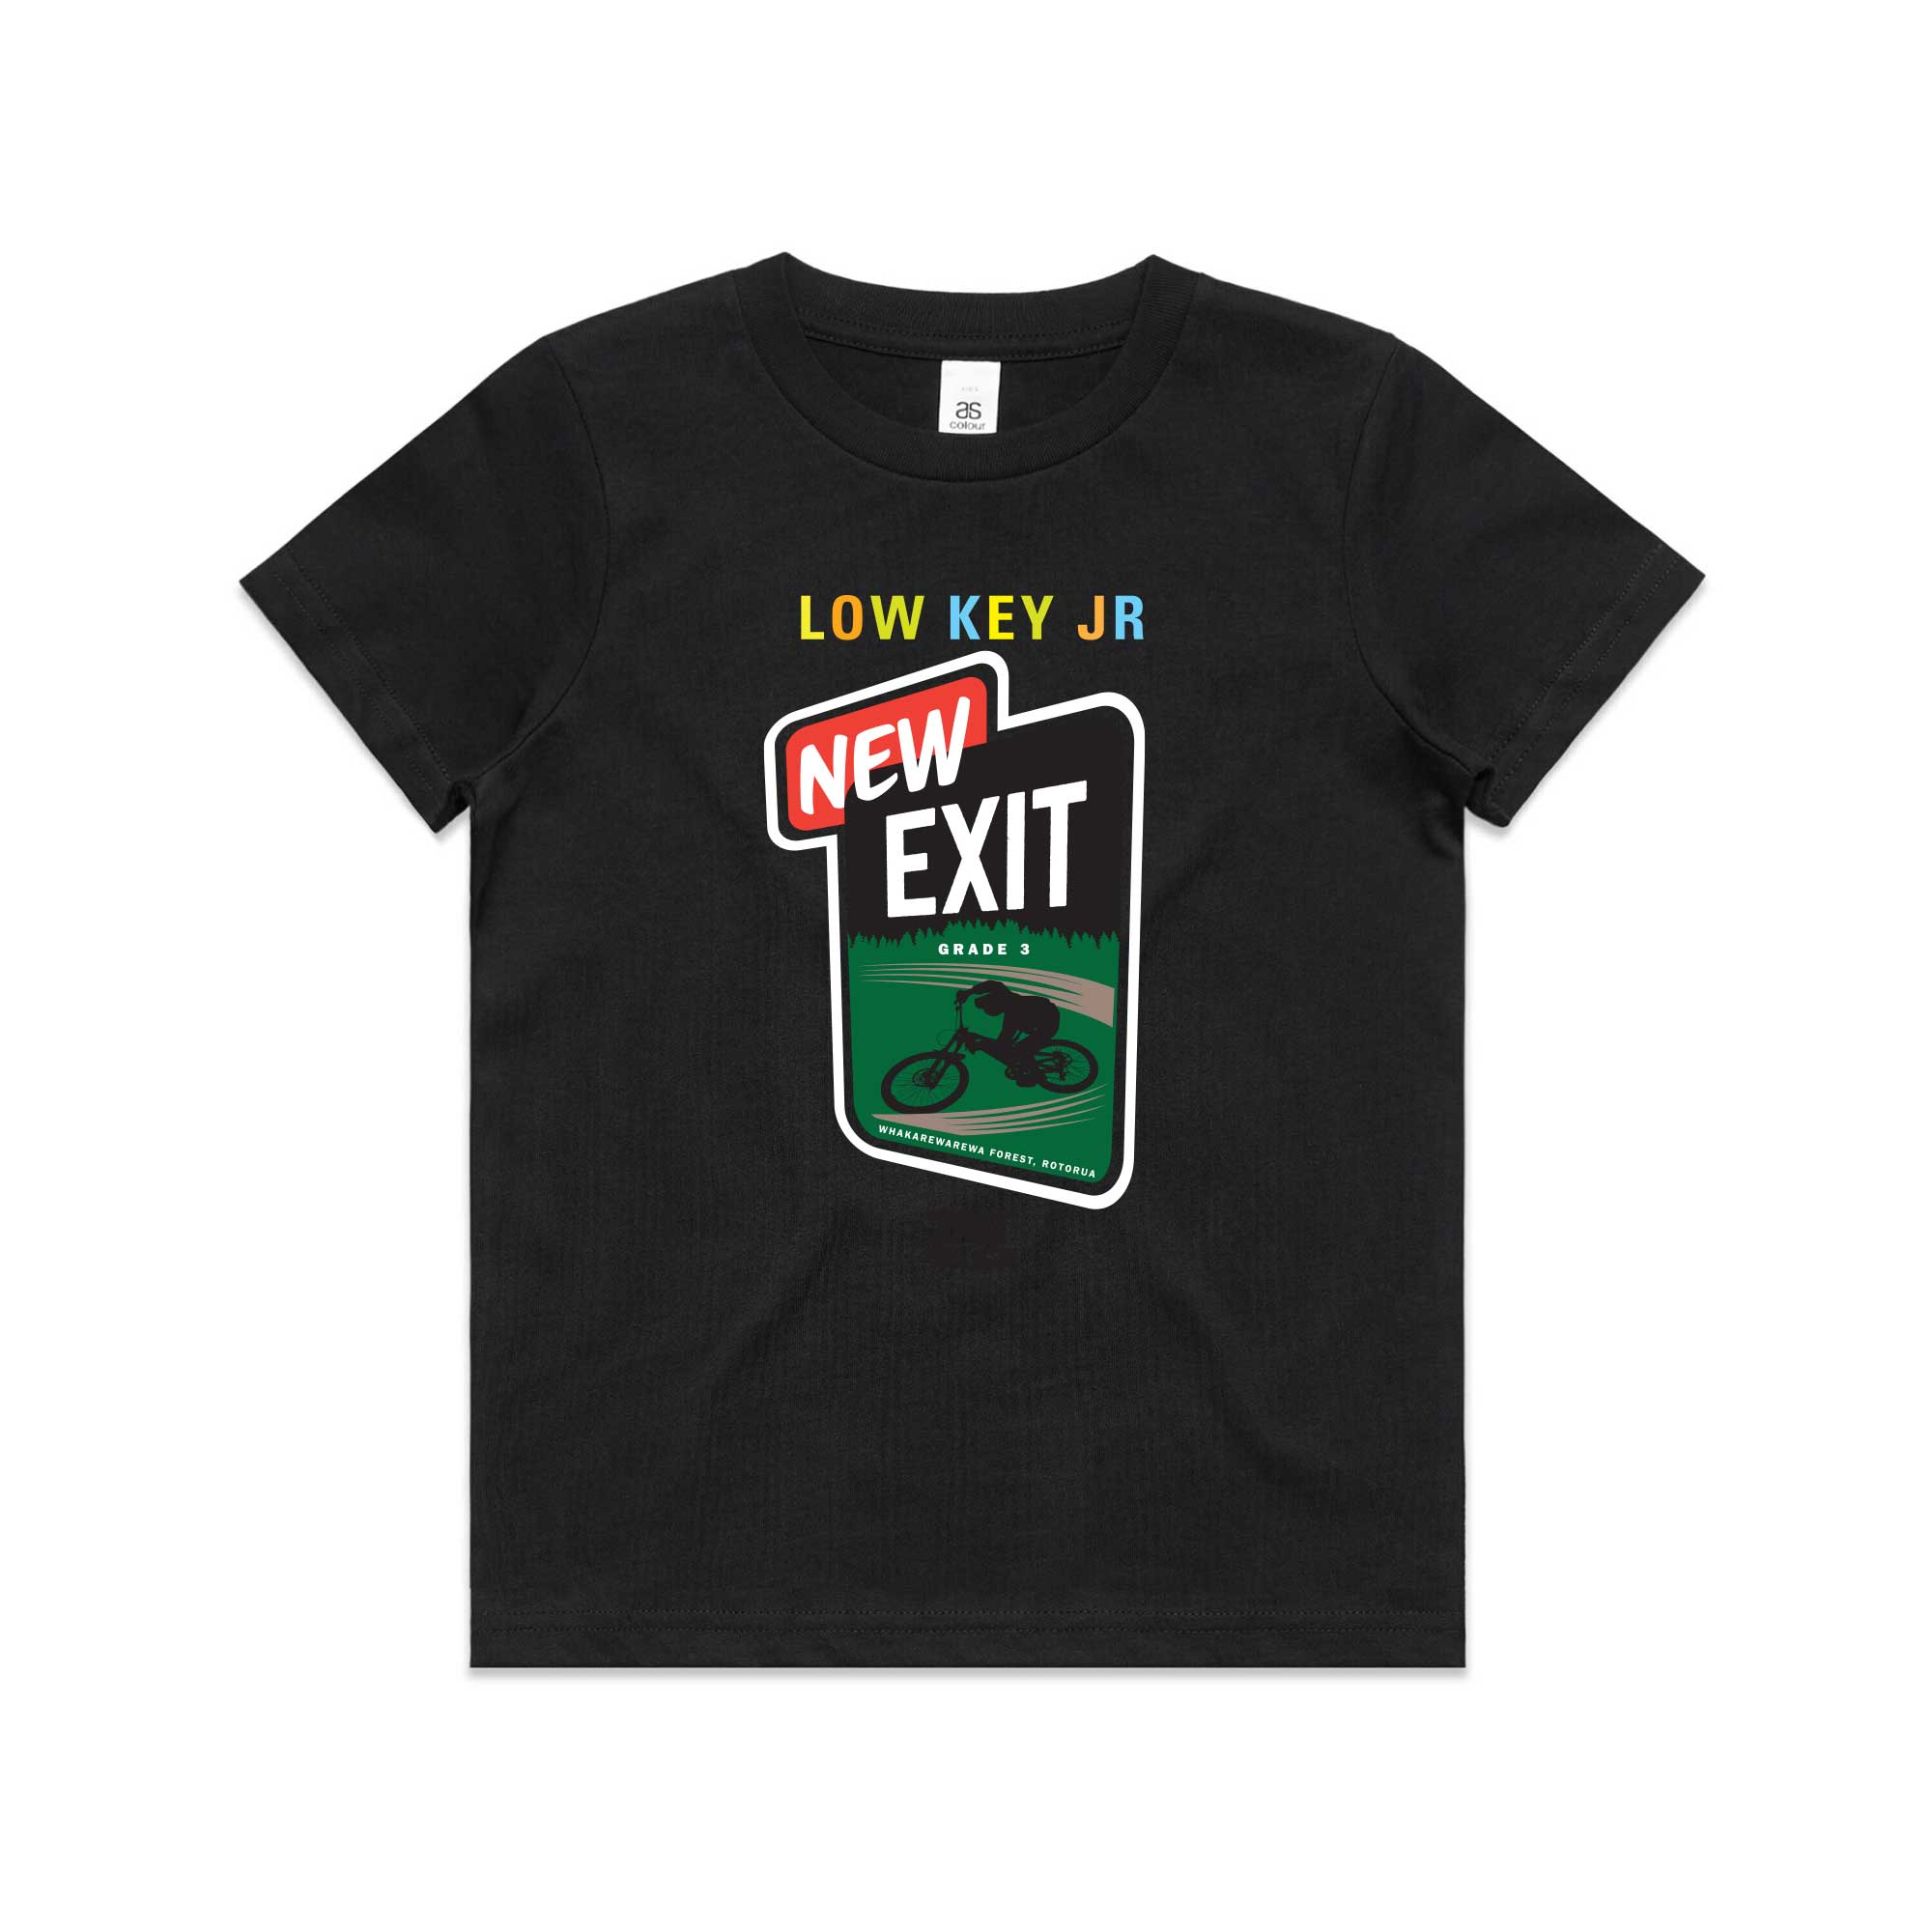 LowKey Jr New Exit Youth T